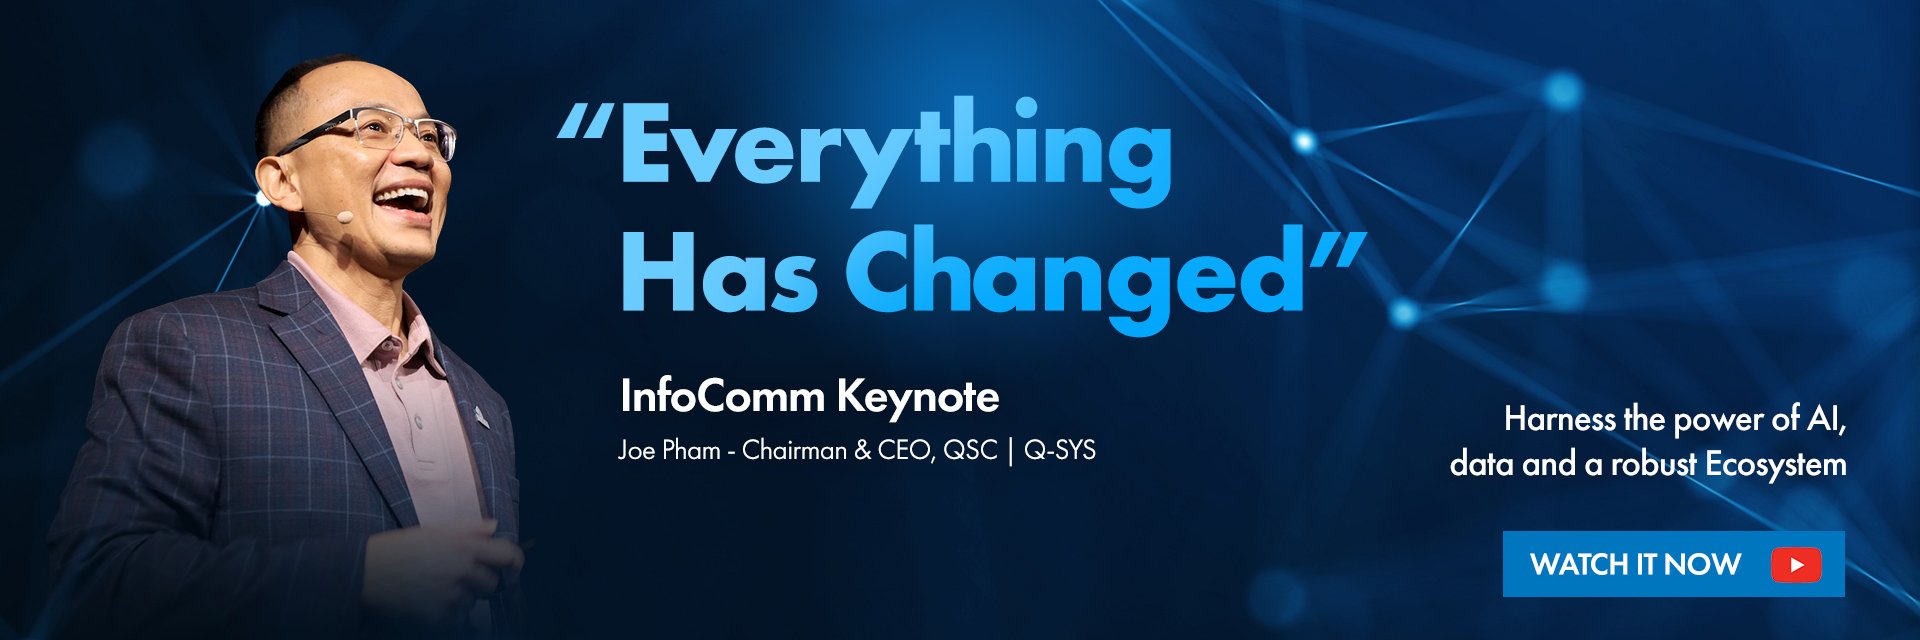 Q-SYS InfoComm Keynote banner text reads: 'Learn to harness the power of AI, data and a robust Ecosystem'